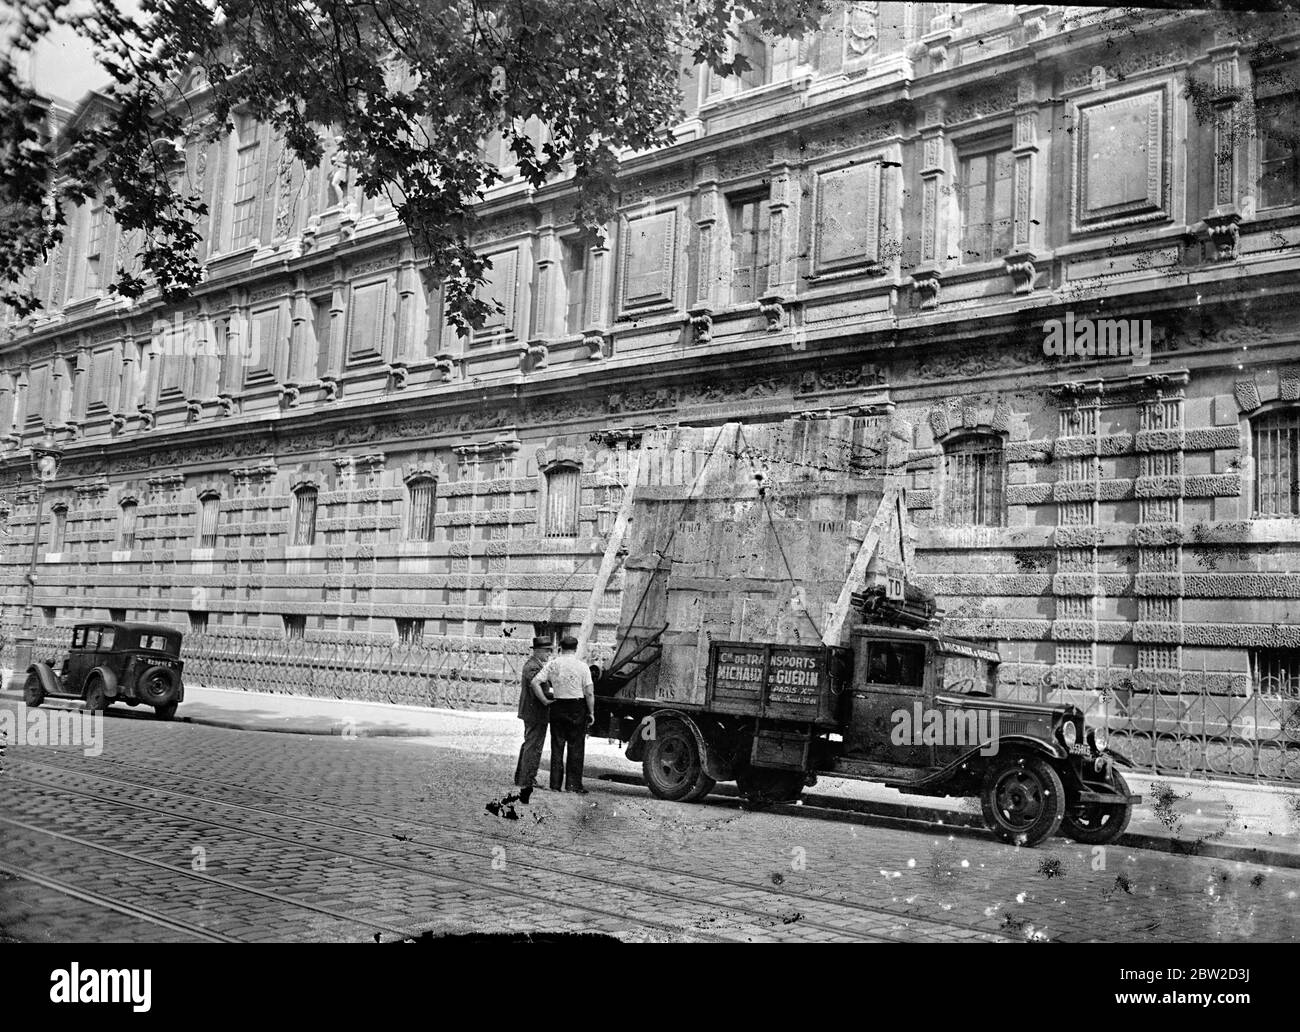 The priceless art treasures in the Louvre and other French museums and galleries are being removed to bombproof shelters in case of war. 28 August 1939 Stock Photo